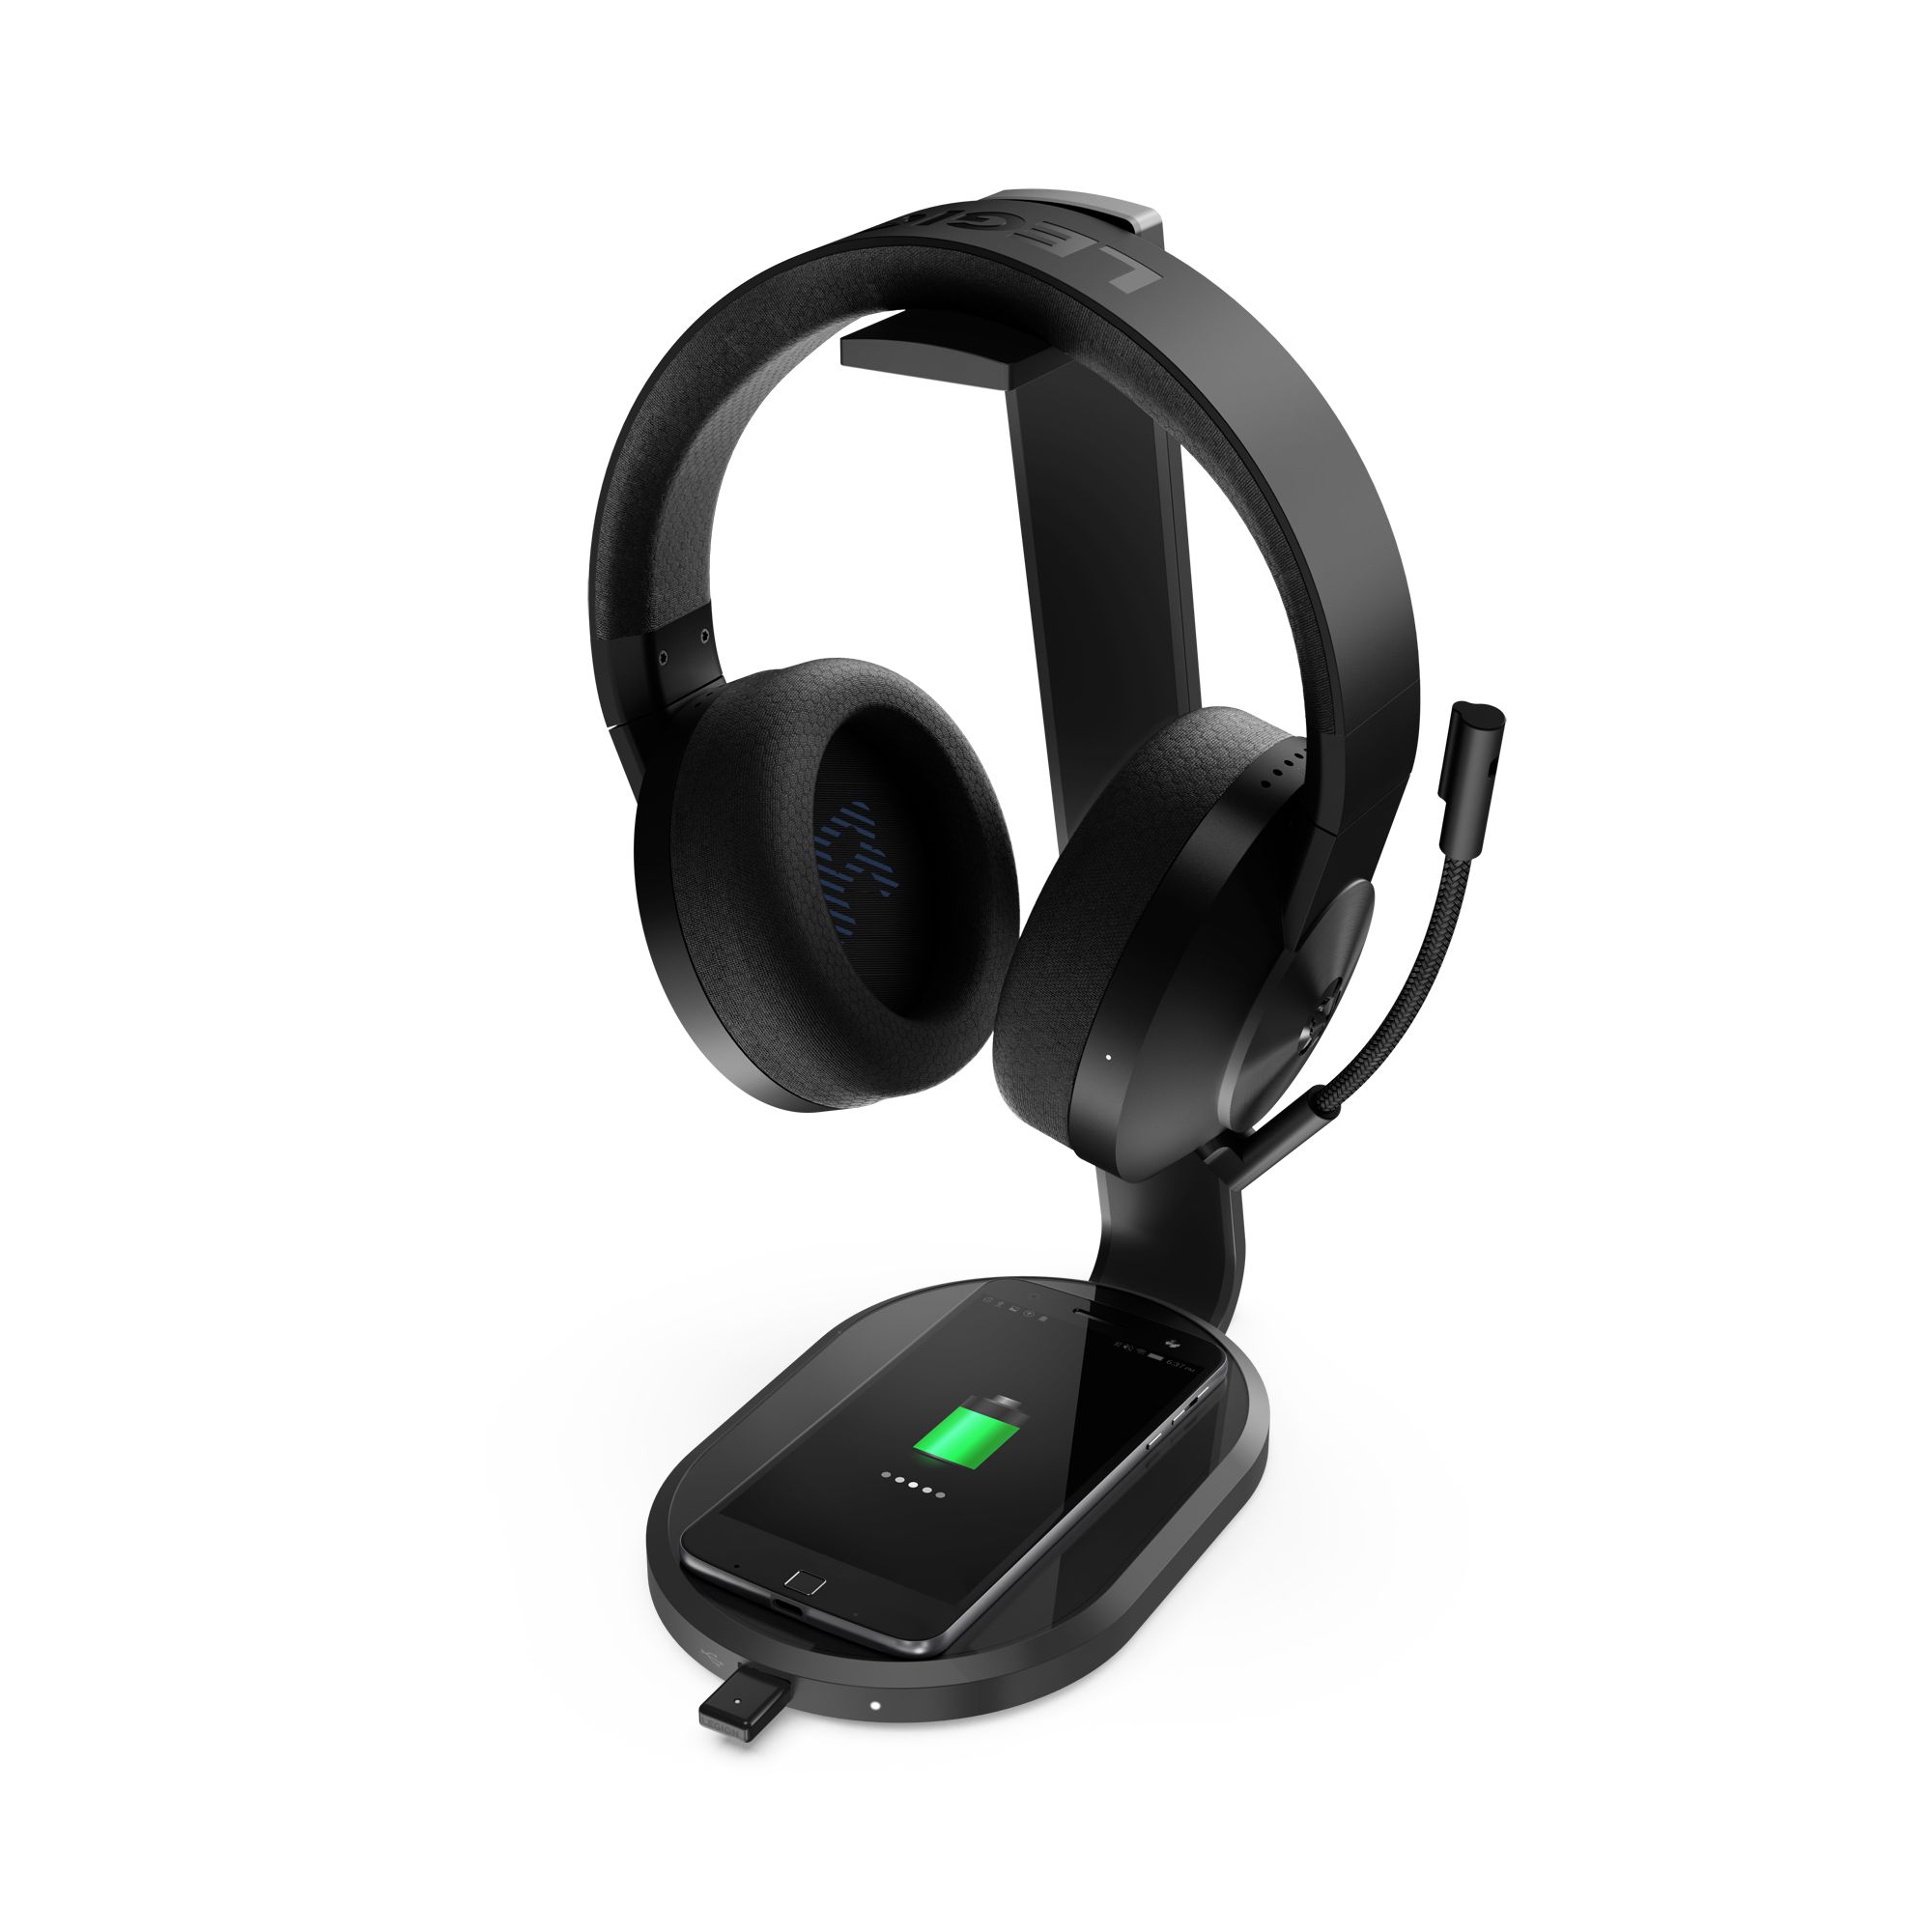 Lenovo_Legion_S600_Gaming_Station_Right_w_Headphones_and_Smartphone_P